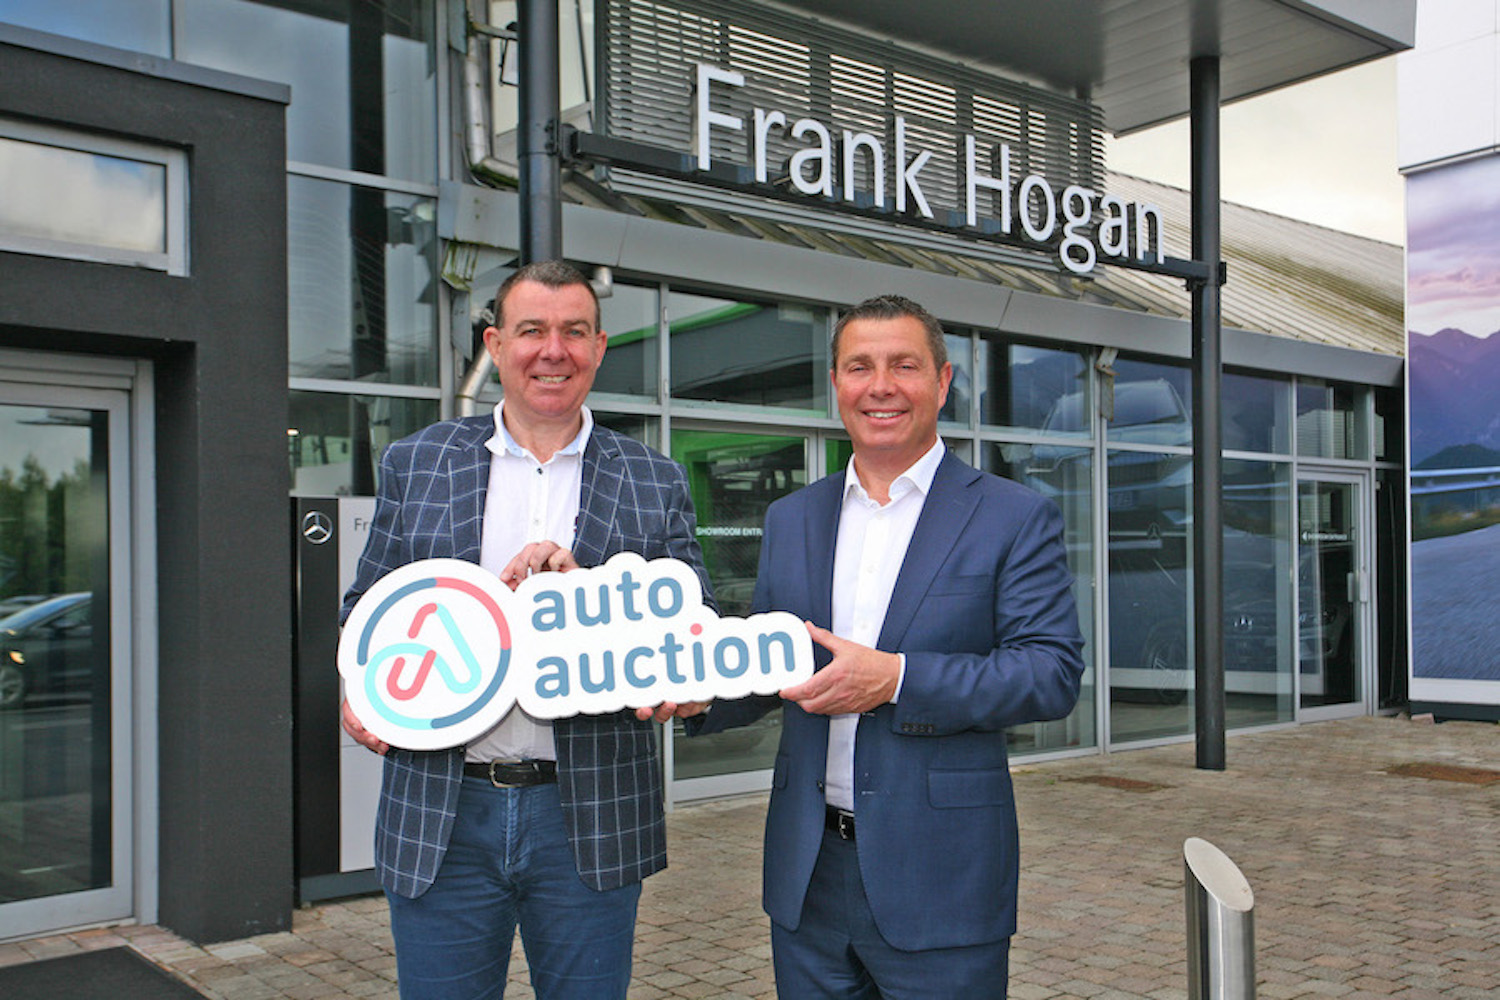 New online car auction service for Ireland